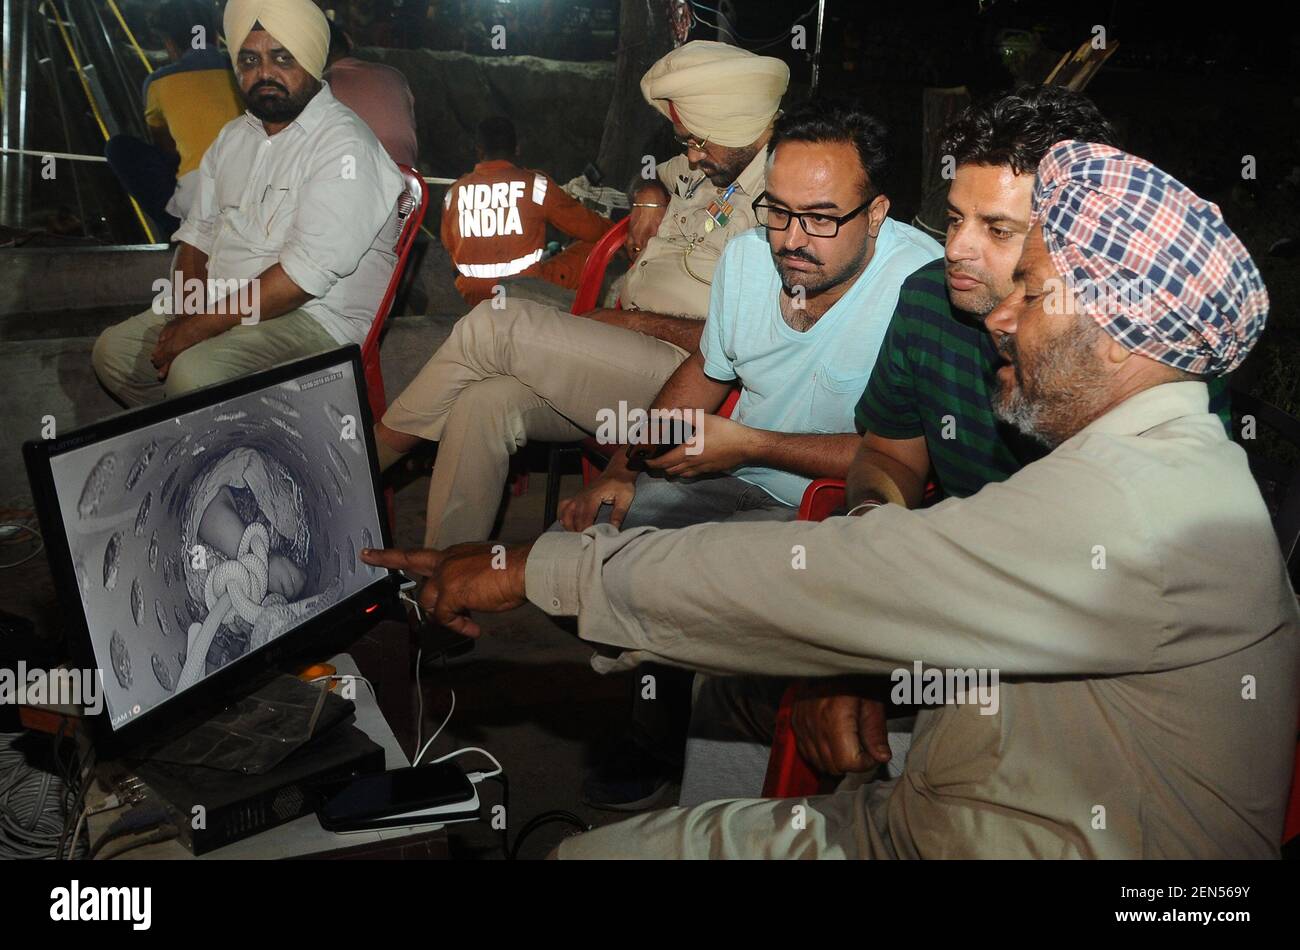 SANGRUR, INDIA - JUNE 10: Fatehveer Singh's grandfather Rohi Singh watches the live footage of his grandson's rescue operation on a screen early in the morning at 2:15 am, at Bhagwanpur village, on June 10, 2019 in Sangrur, India. Fatehvir Singh, a two-year-old boy remained stuck in a 150-foot-deep borewell in Punjab's Sangrur district, amid mounting anger over the delay in retrieving him even after over 100 hours since he fell into it. He fell into fell into the unused seven-inch wide borewell in a field around 4 pm on Thursday.(Photo by Bharat Bhushan/Hindustan Times/Sipa USA) Stock Photo